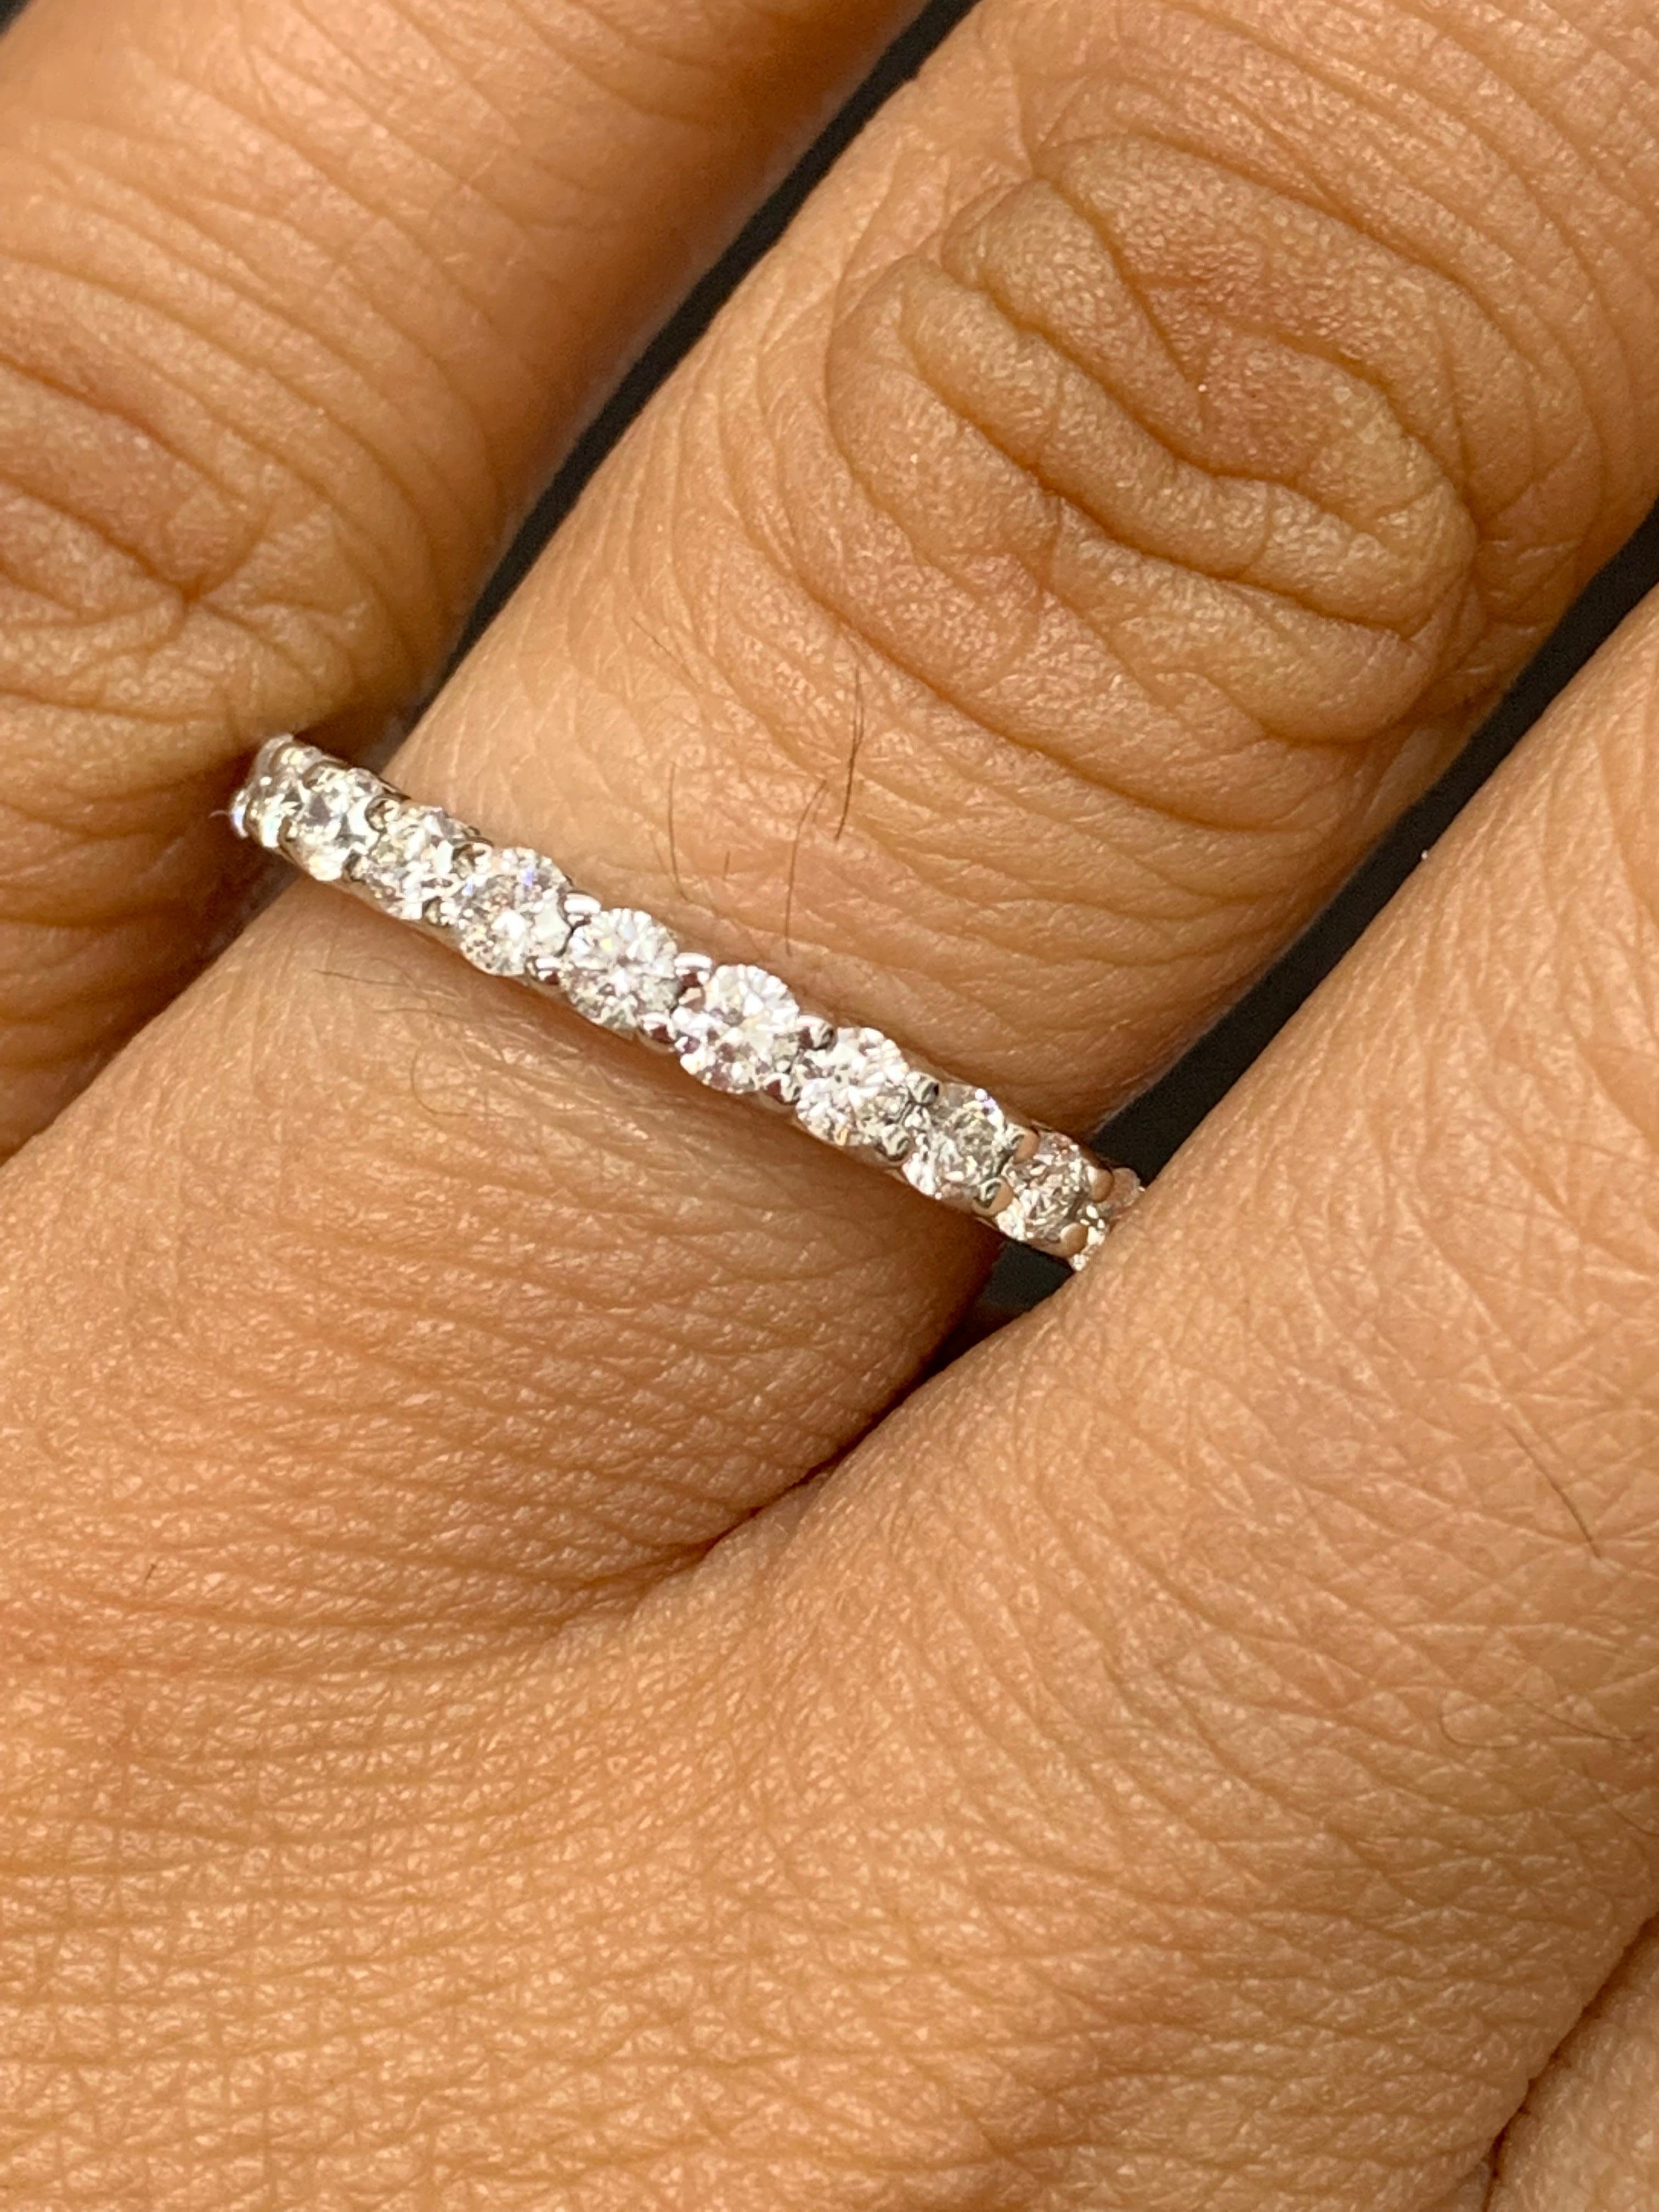 A classic and timeless eternity band style showcasing a row of round brilliant diamonds set in a shared prong 14K white gold mounting. 27 Diamonds weigh 1.01 carats. Size 6.5 US.

Style is available in different price ranges. Prices are based on